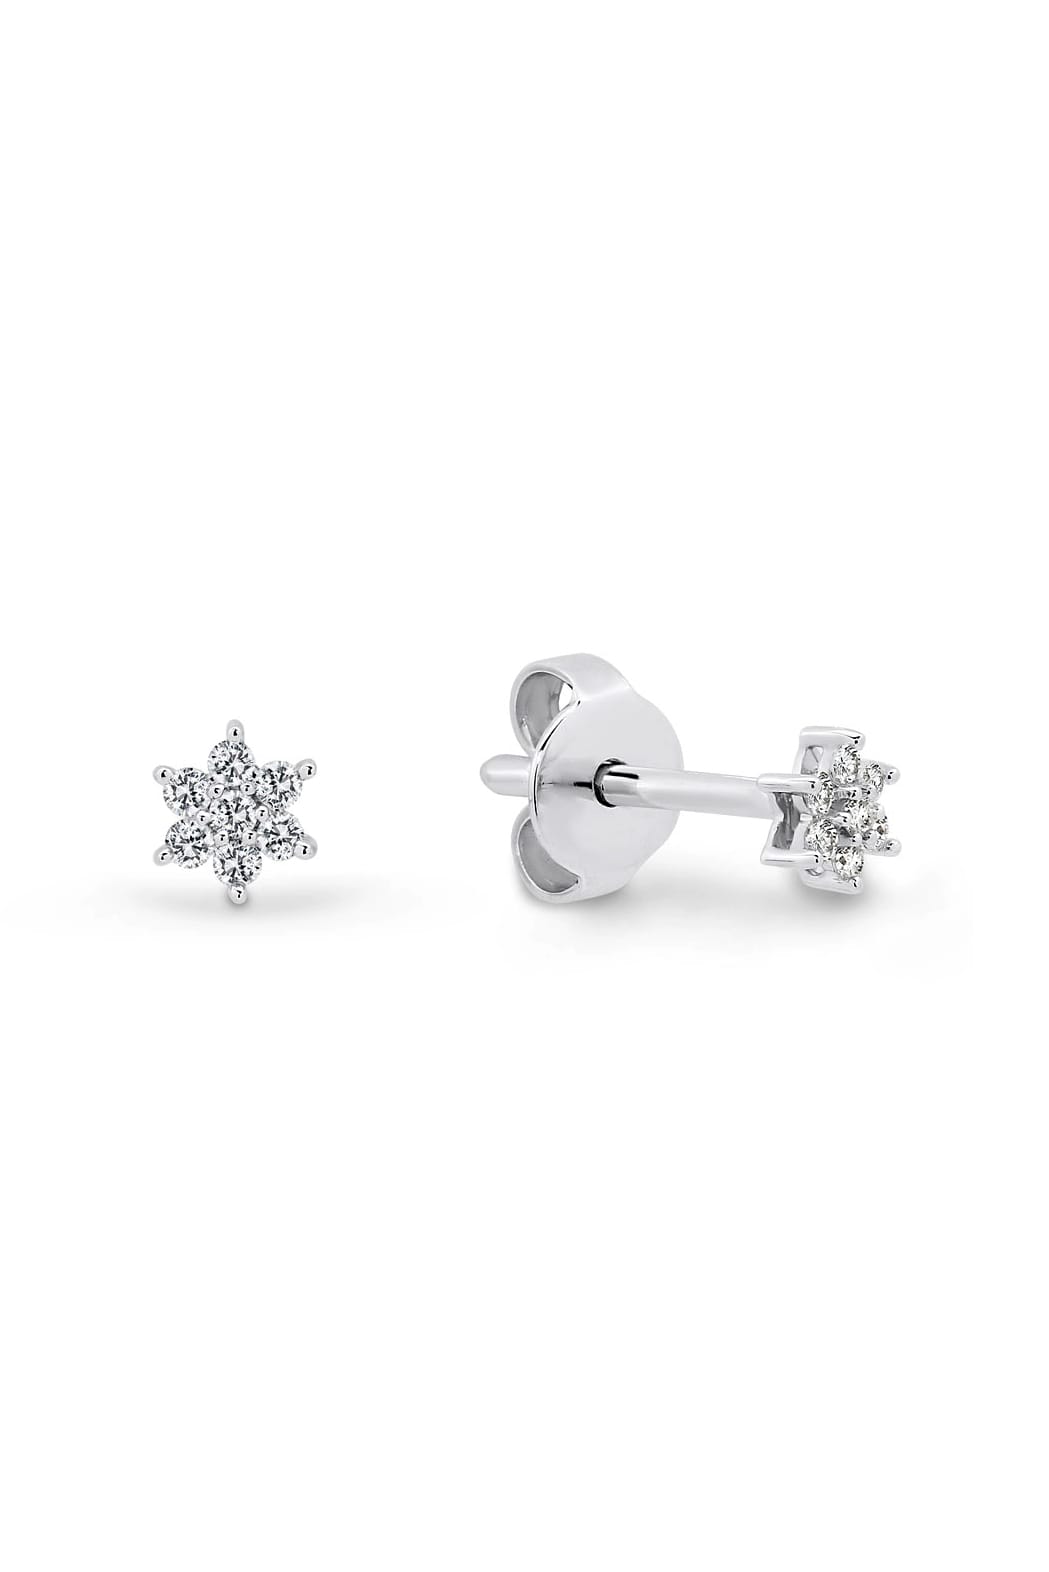 0.11ct Diamond Cluster Stud Earrings set in 9ct White Gold from LeGassick Jewellery Gold Coast.